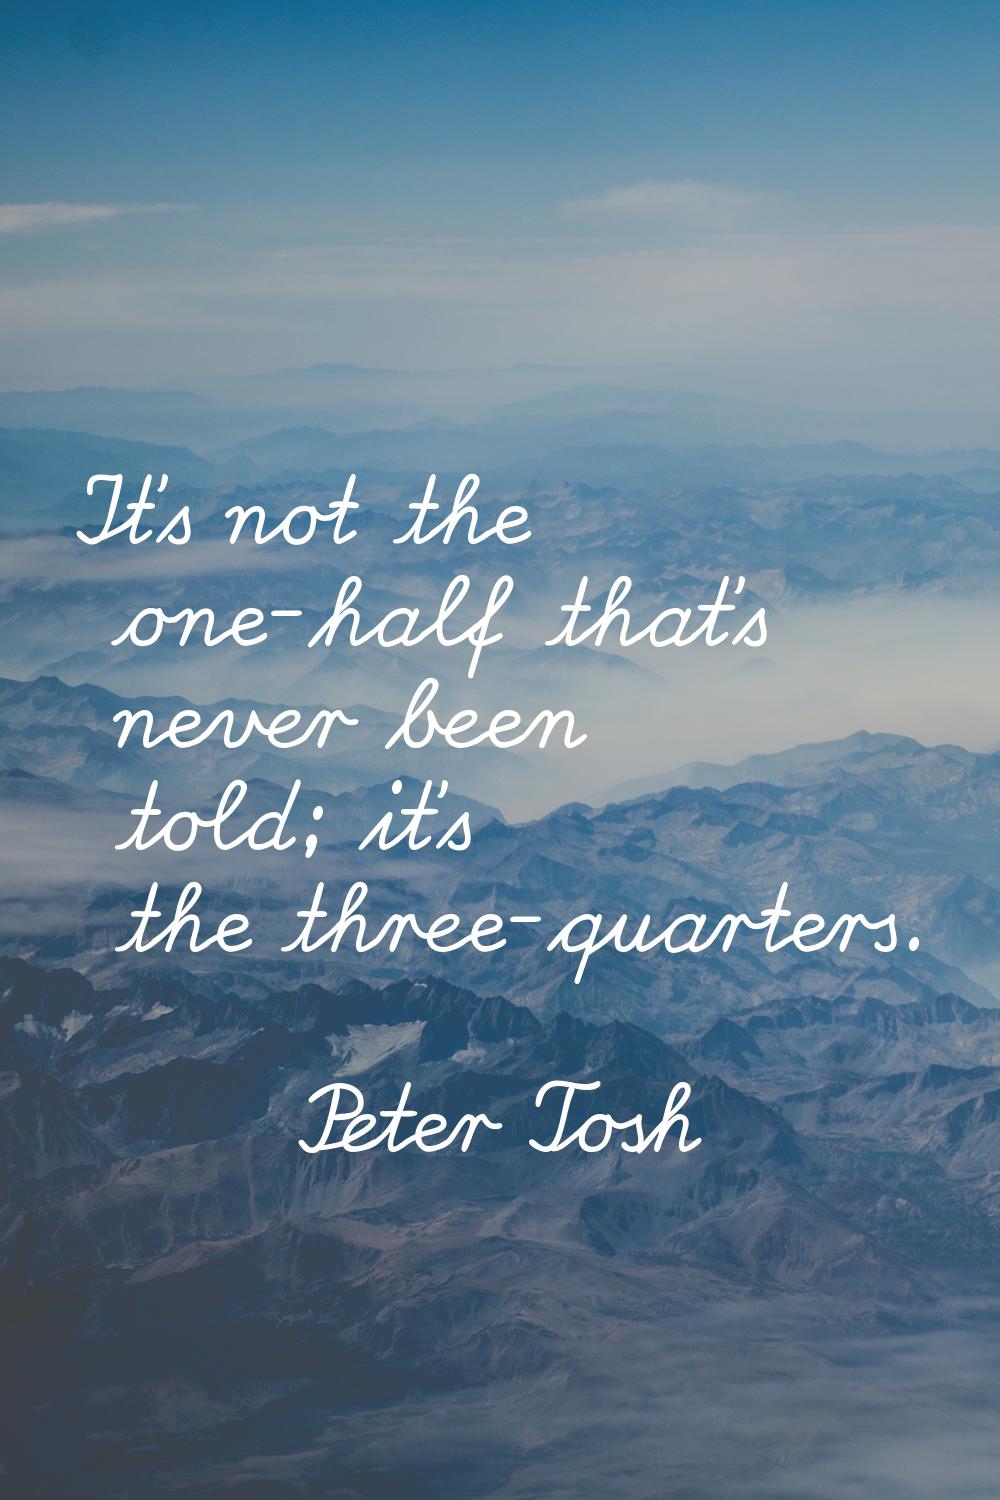 It's not the one-half that's never been told; it's the three-quarters.